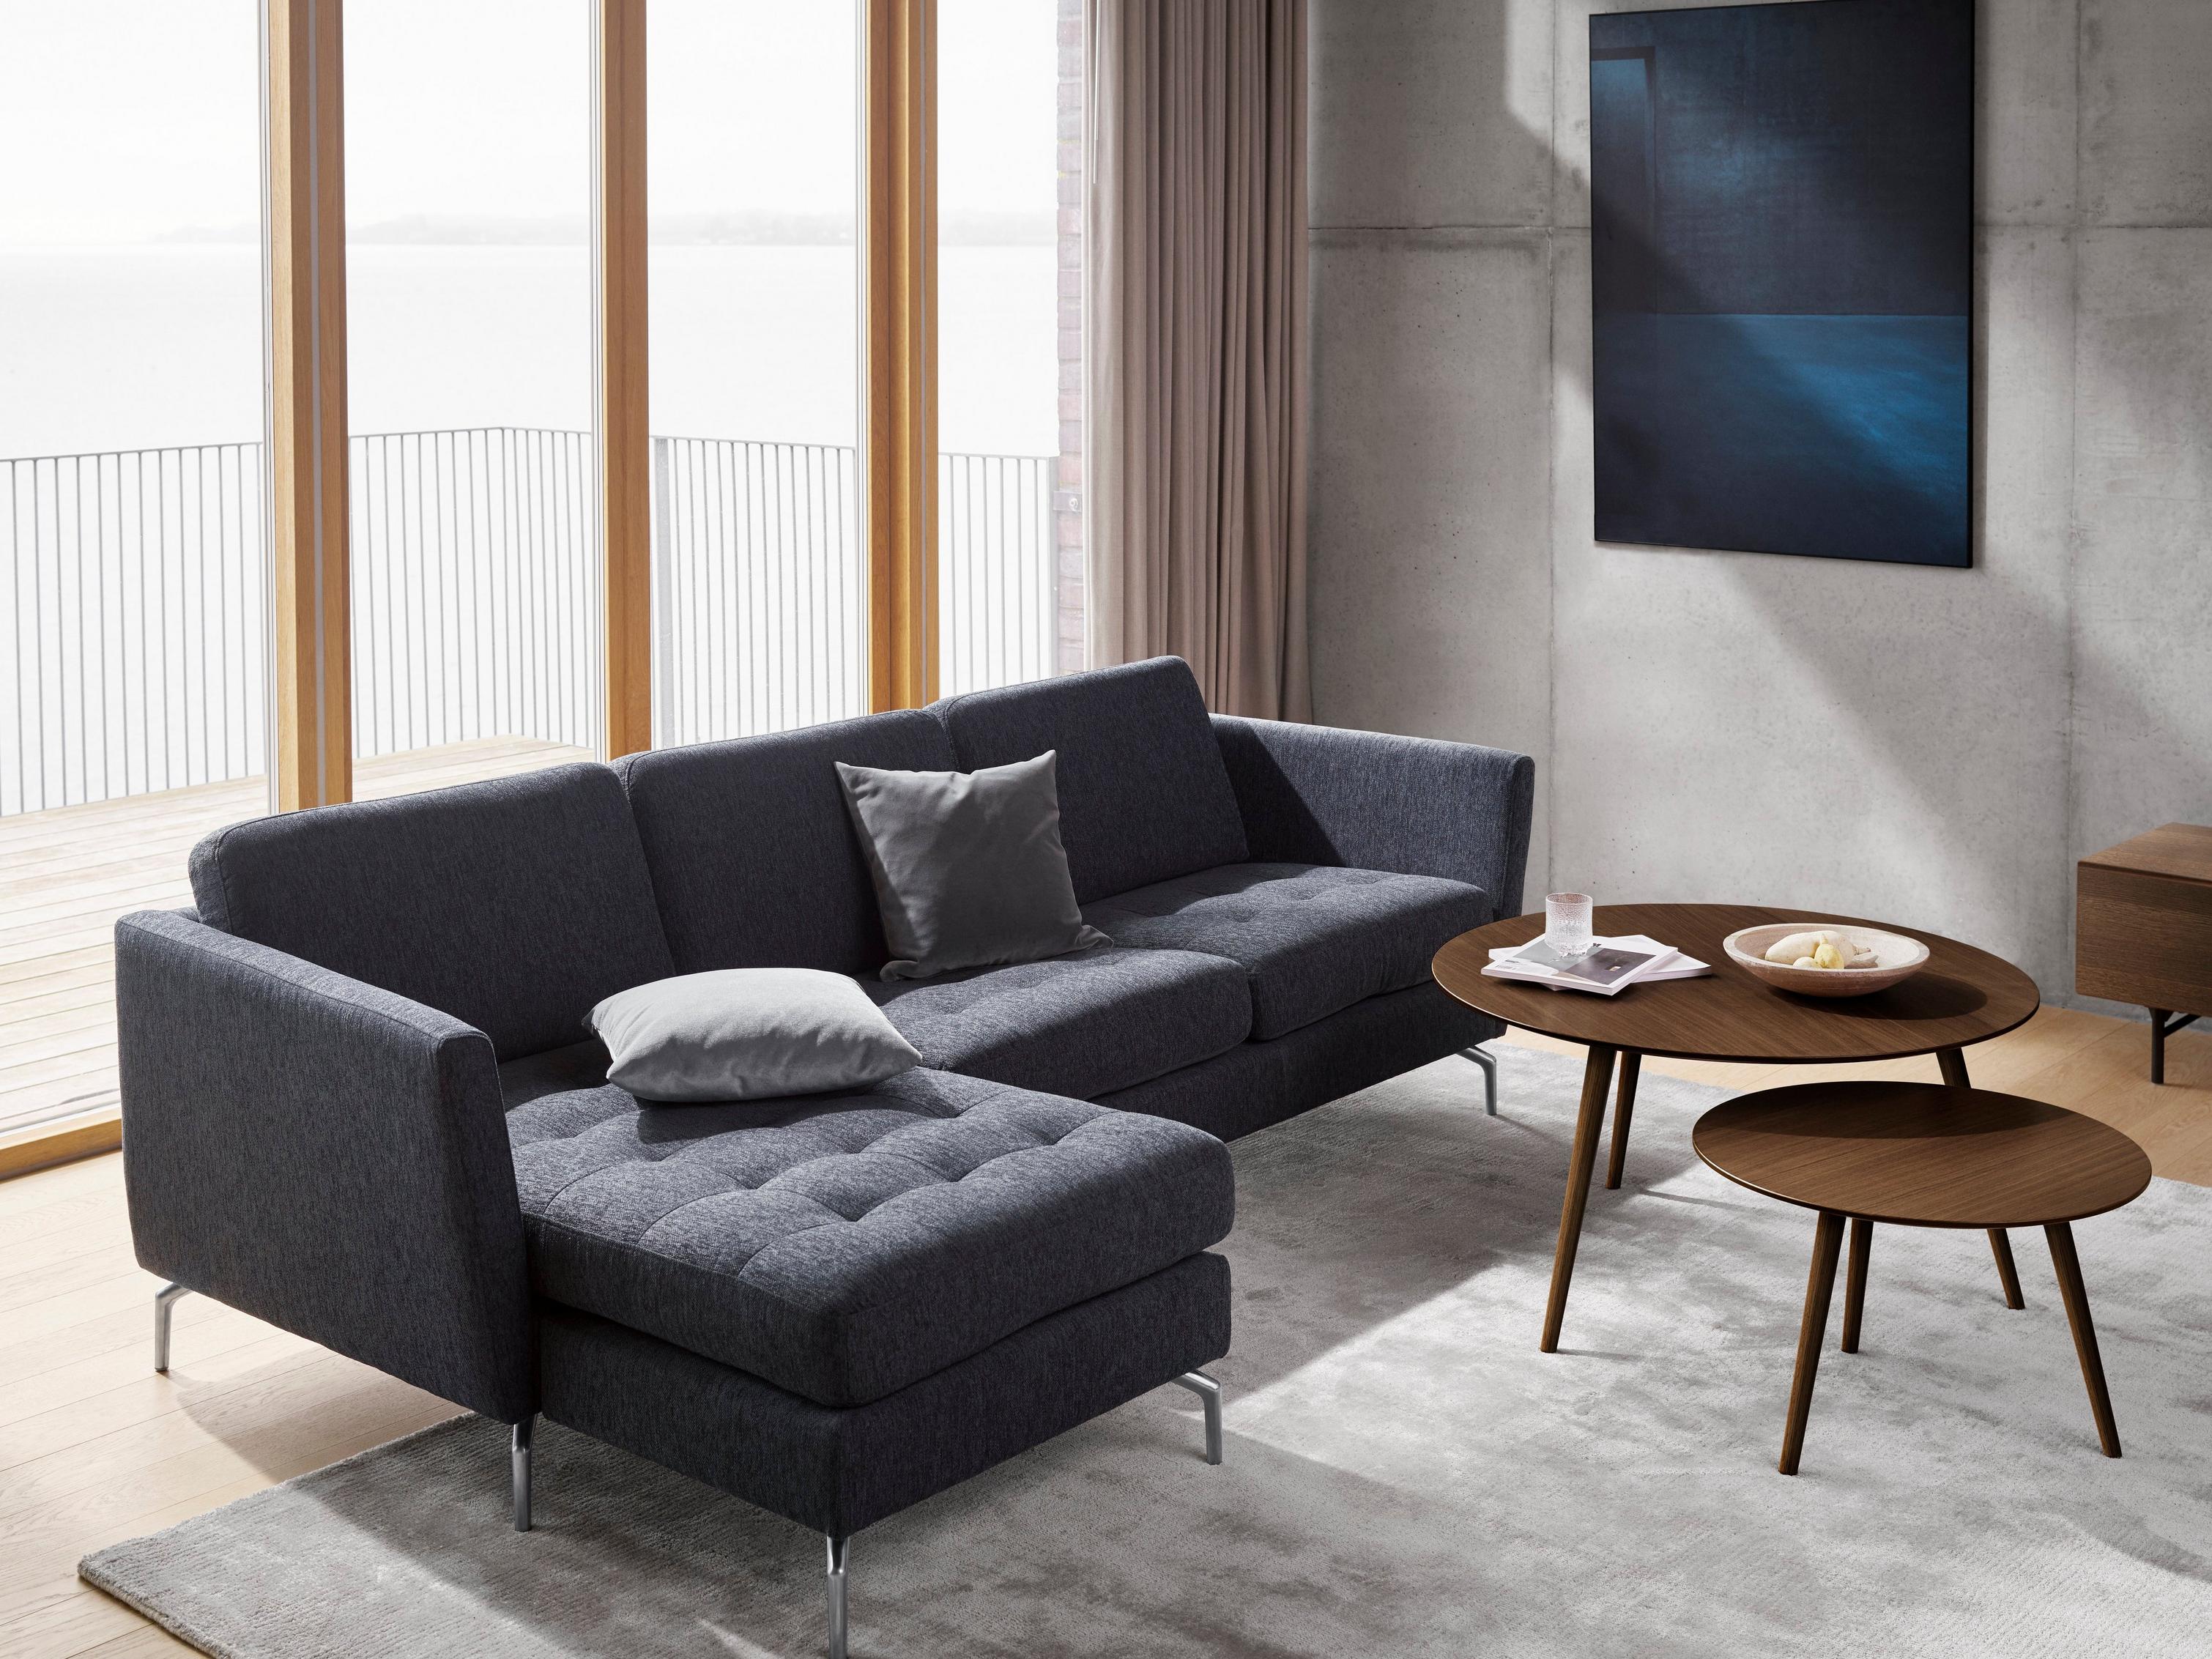 Relaxing living room with the Osaka sofa in blue Bristol, and the Bornholm coffee table in dark oak veneer.